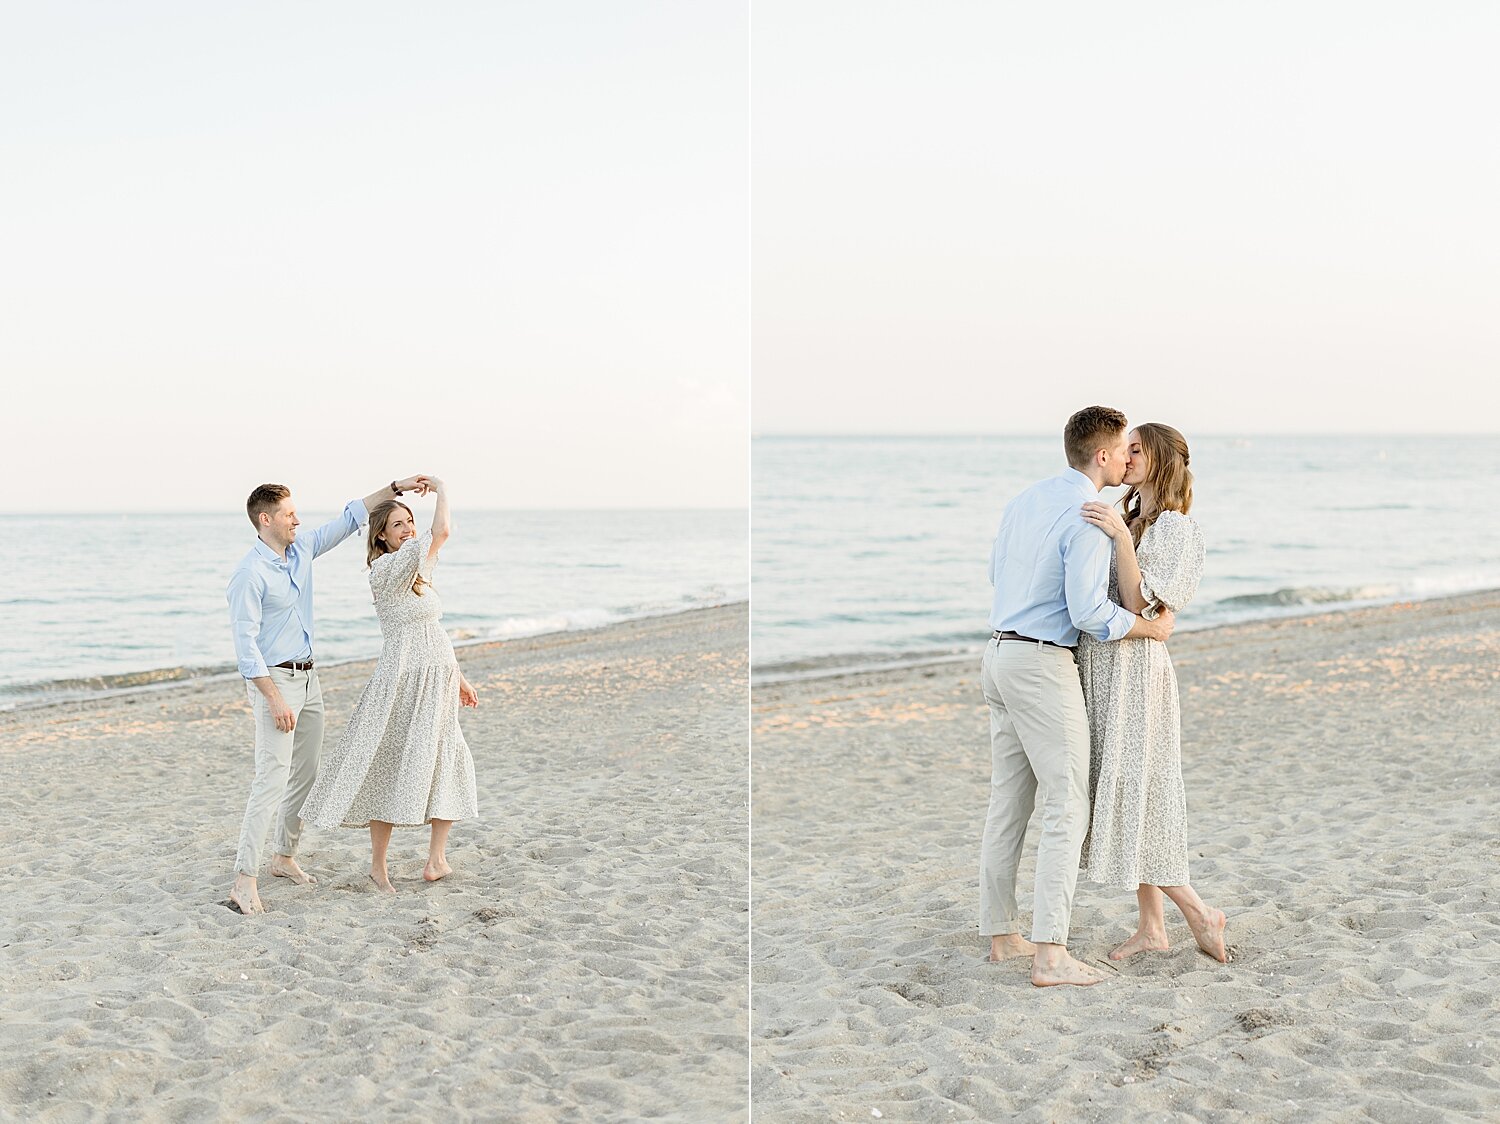 Parents dancing on the beach during maternity photoshoot in Westport, CT | Kristin Wood Photography